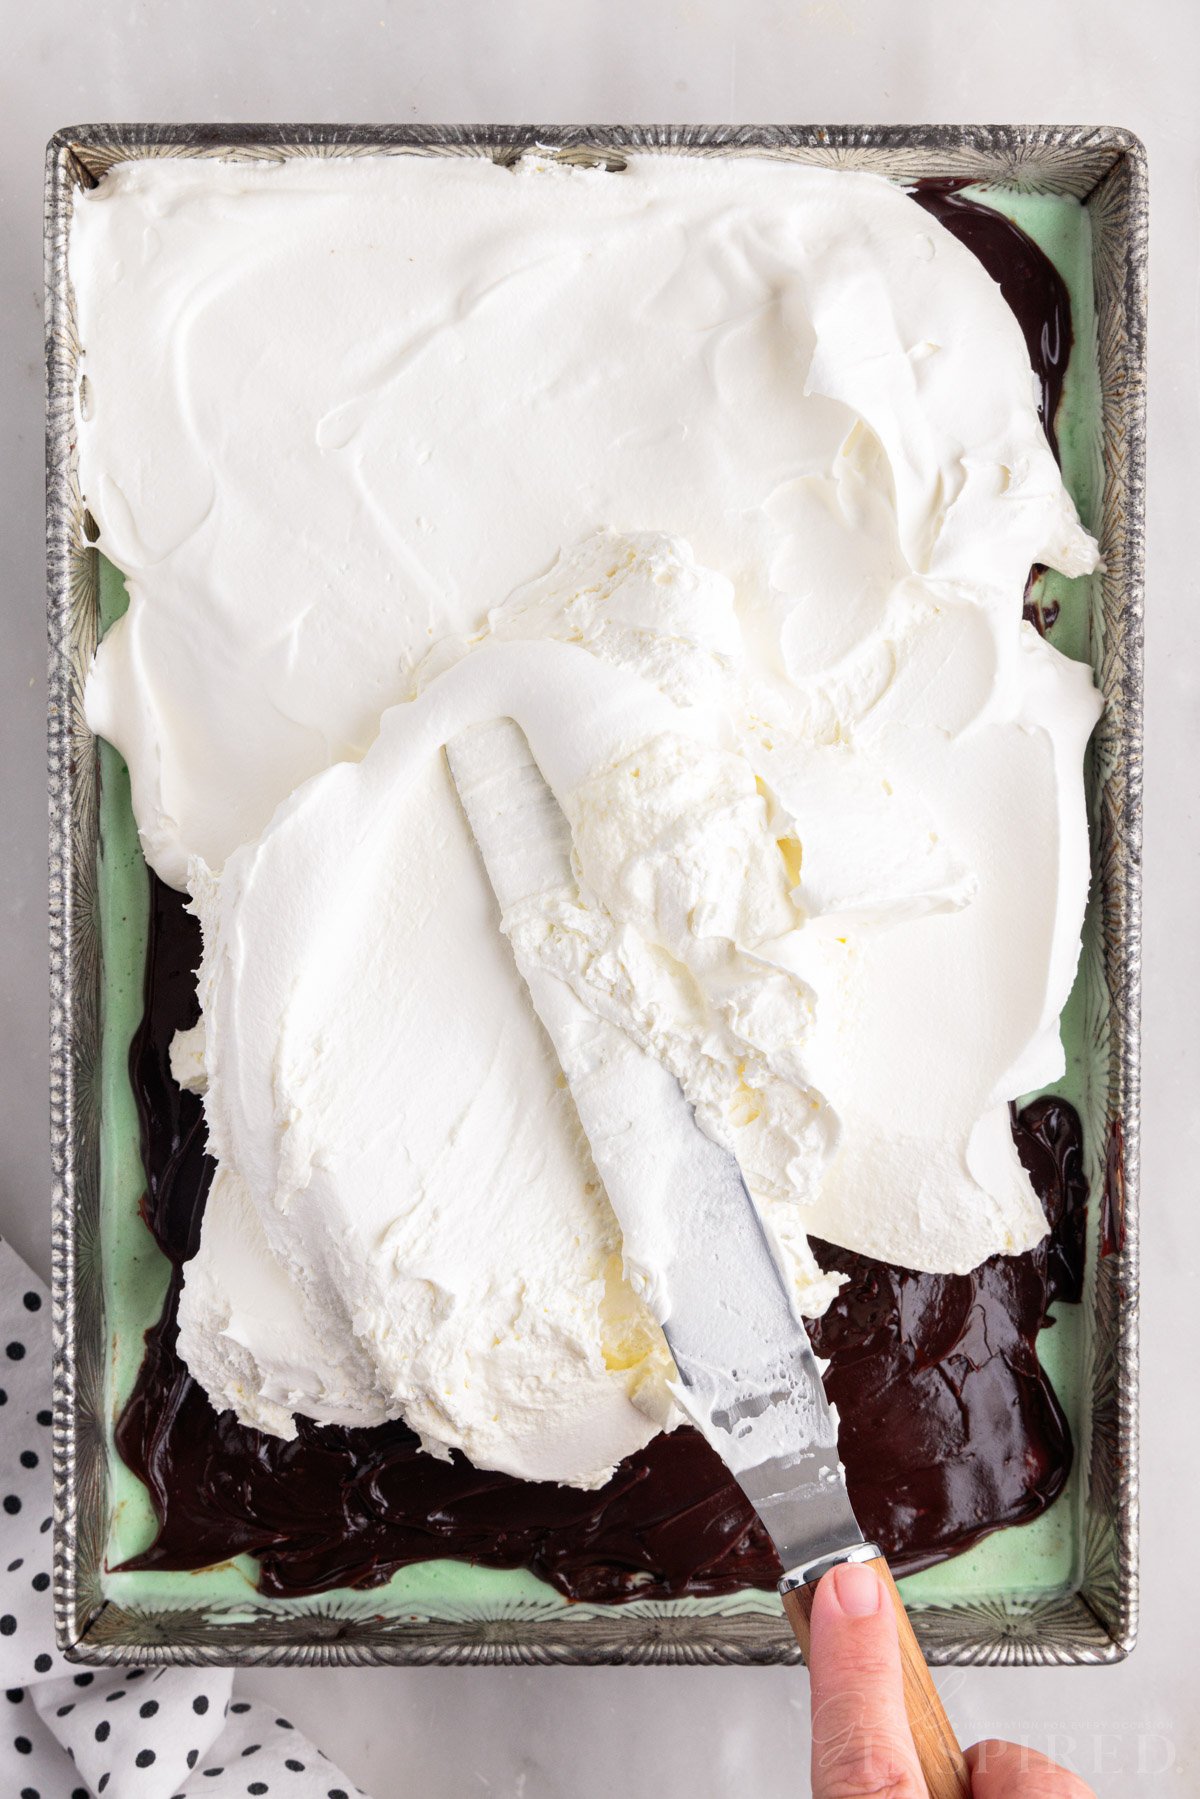 Cool whip spread onto hot fudge layer with offset spatula.